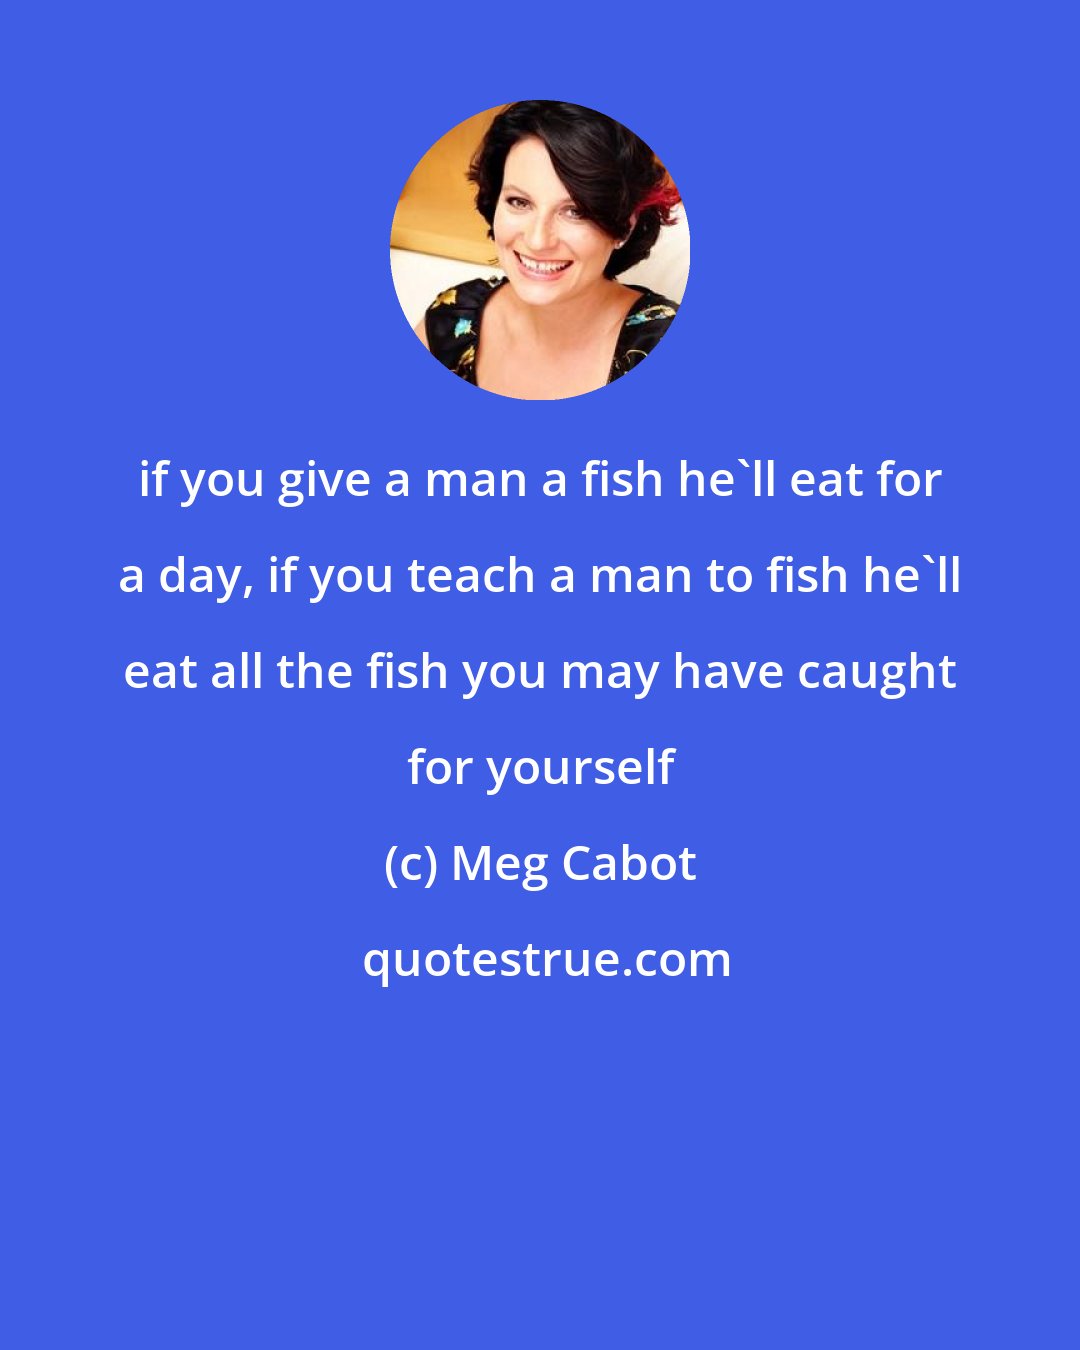 Meg Cabot: if you give a man a fish he'll eat for a day, if you teach a man to fish he'll eat all the fish you may have caught for yourself